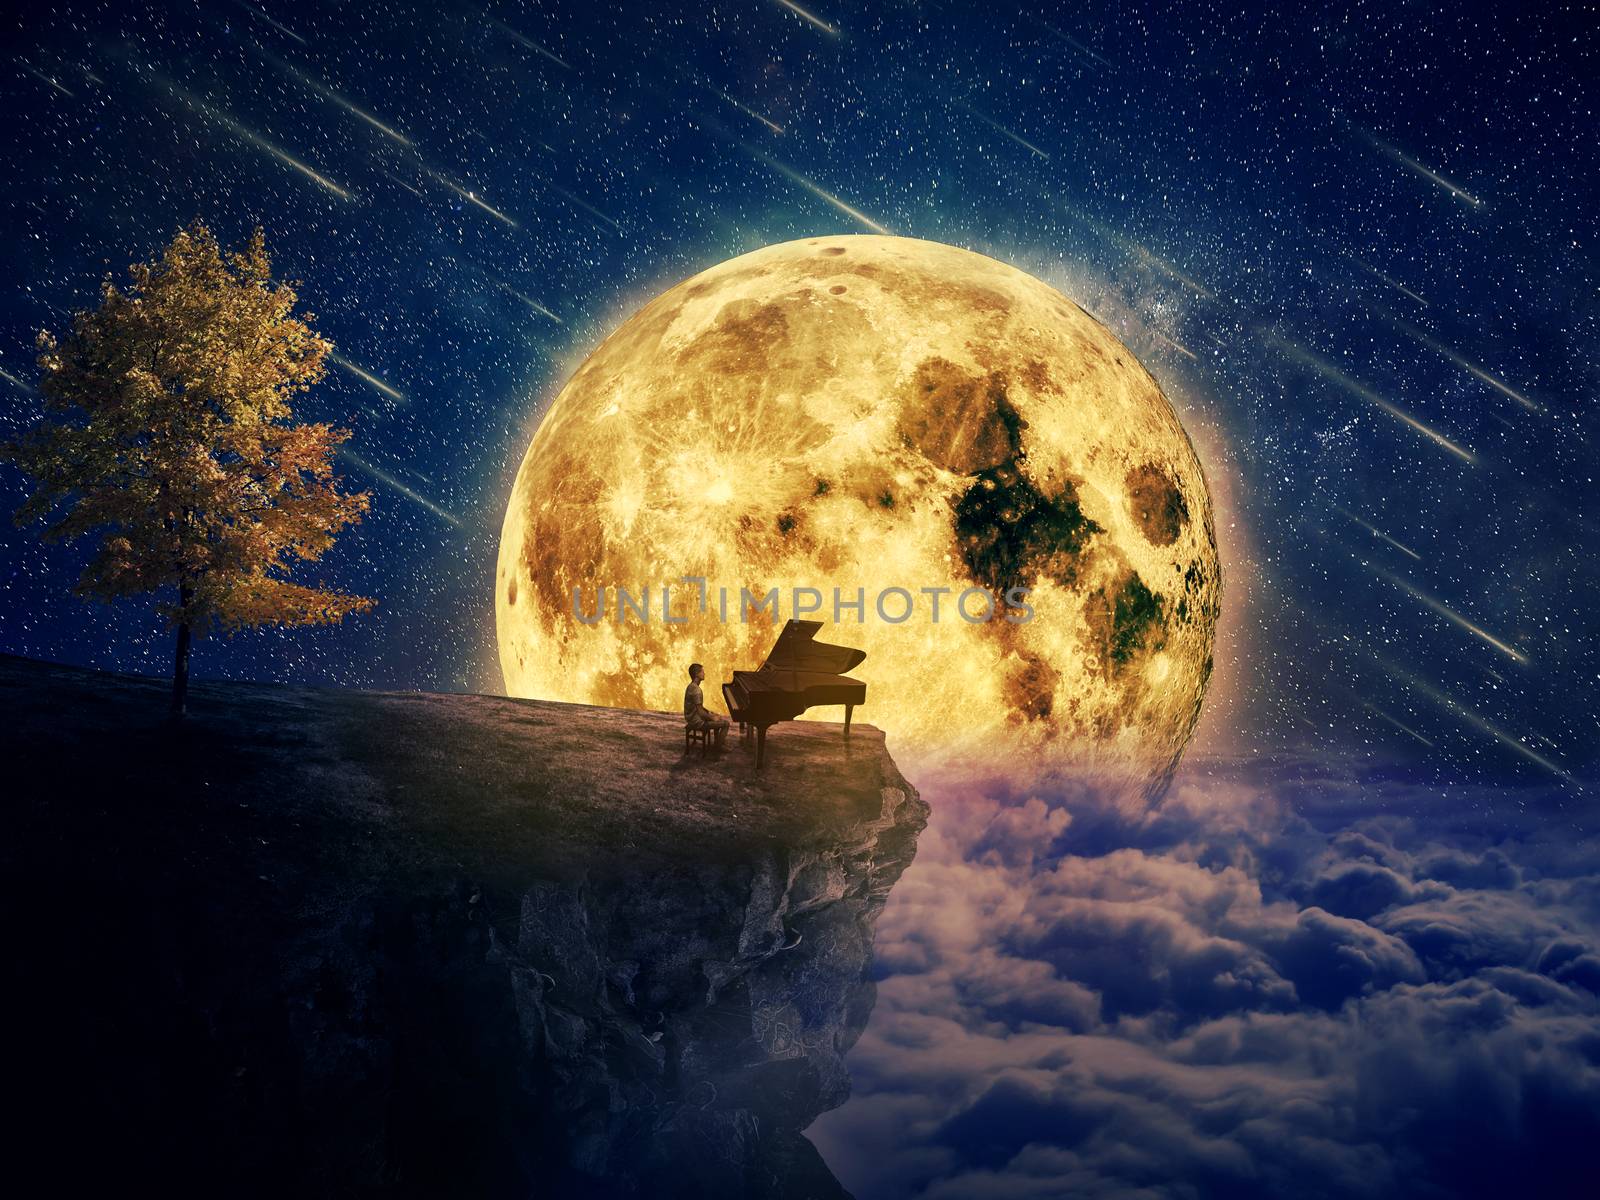 Night scene with a boy, musician standing at the edge of a cliff chasm with his piano. Waiting for music inspiration in the center of nature, over a full moon night background.
